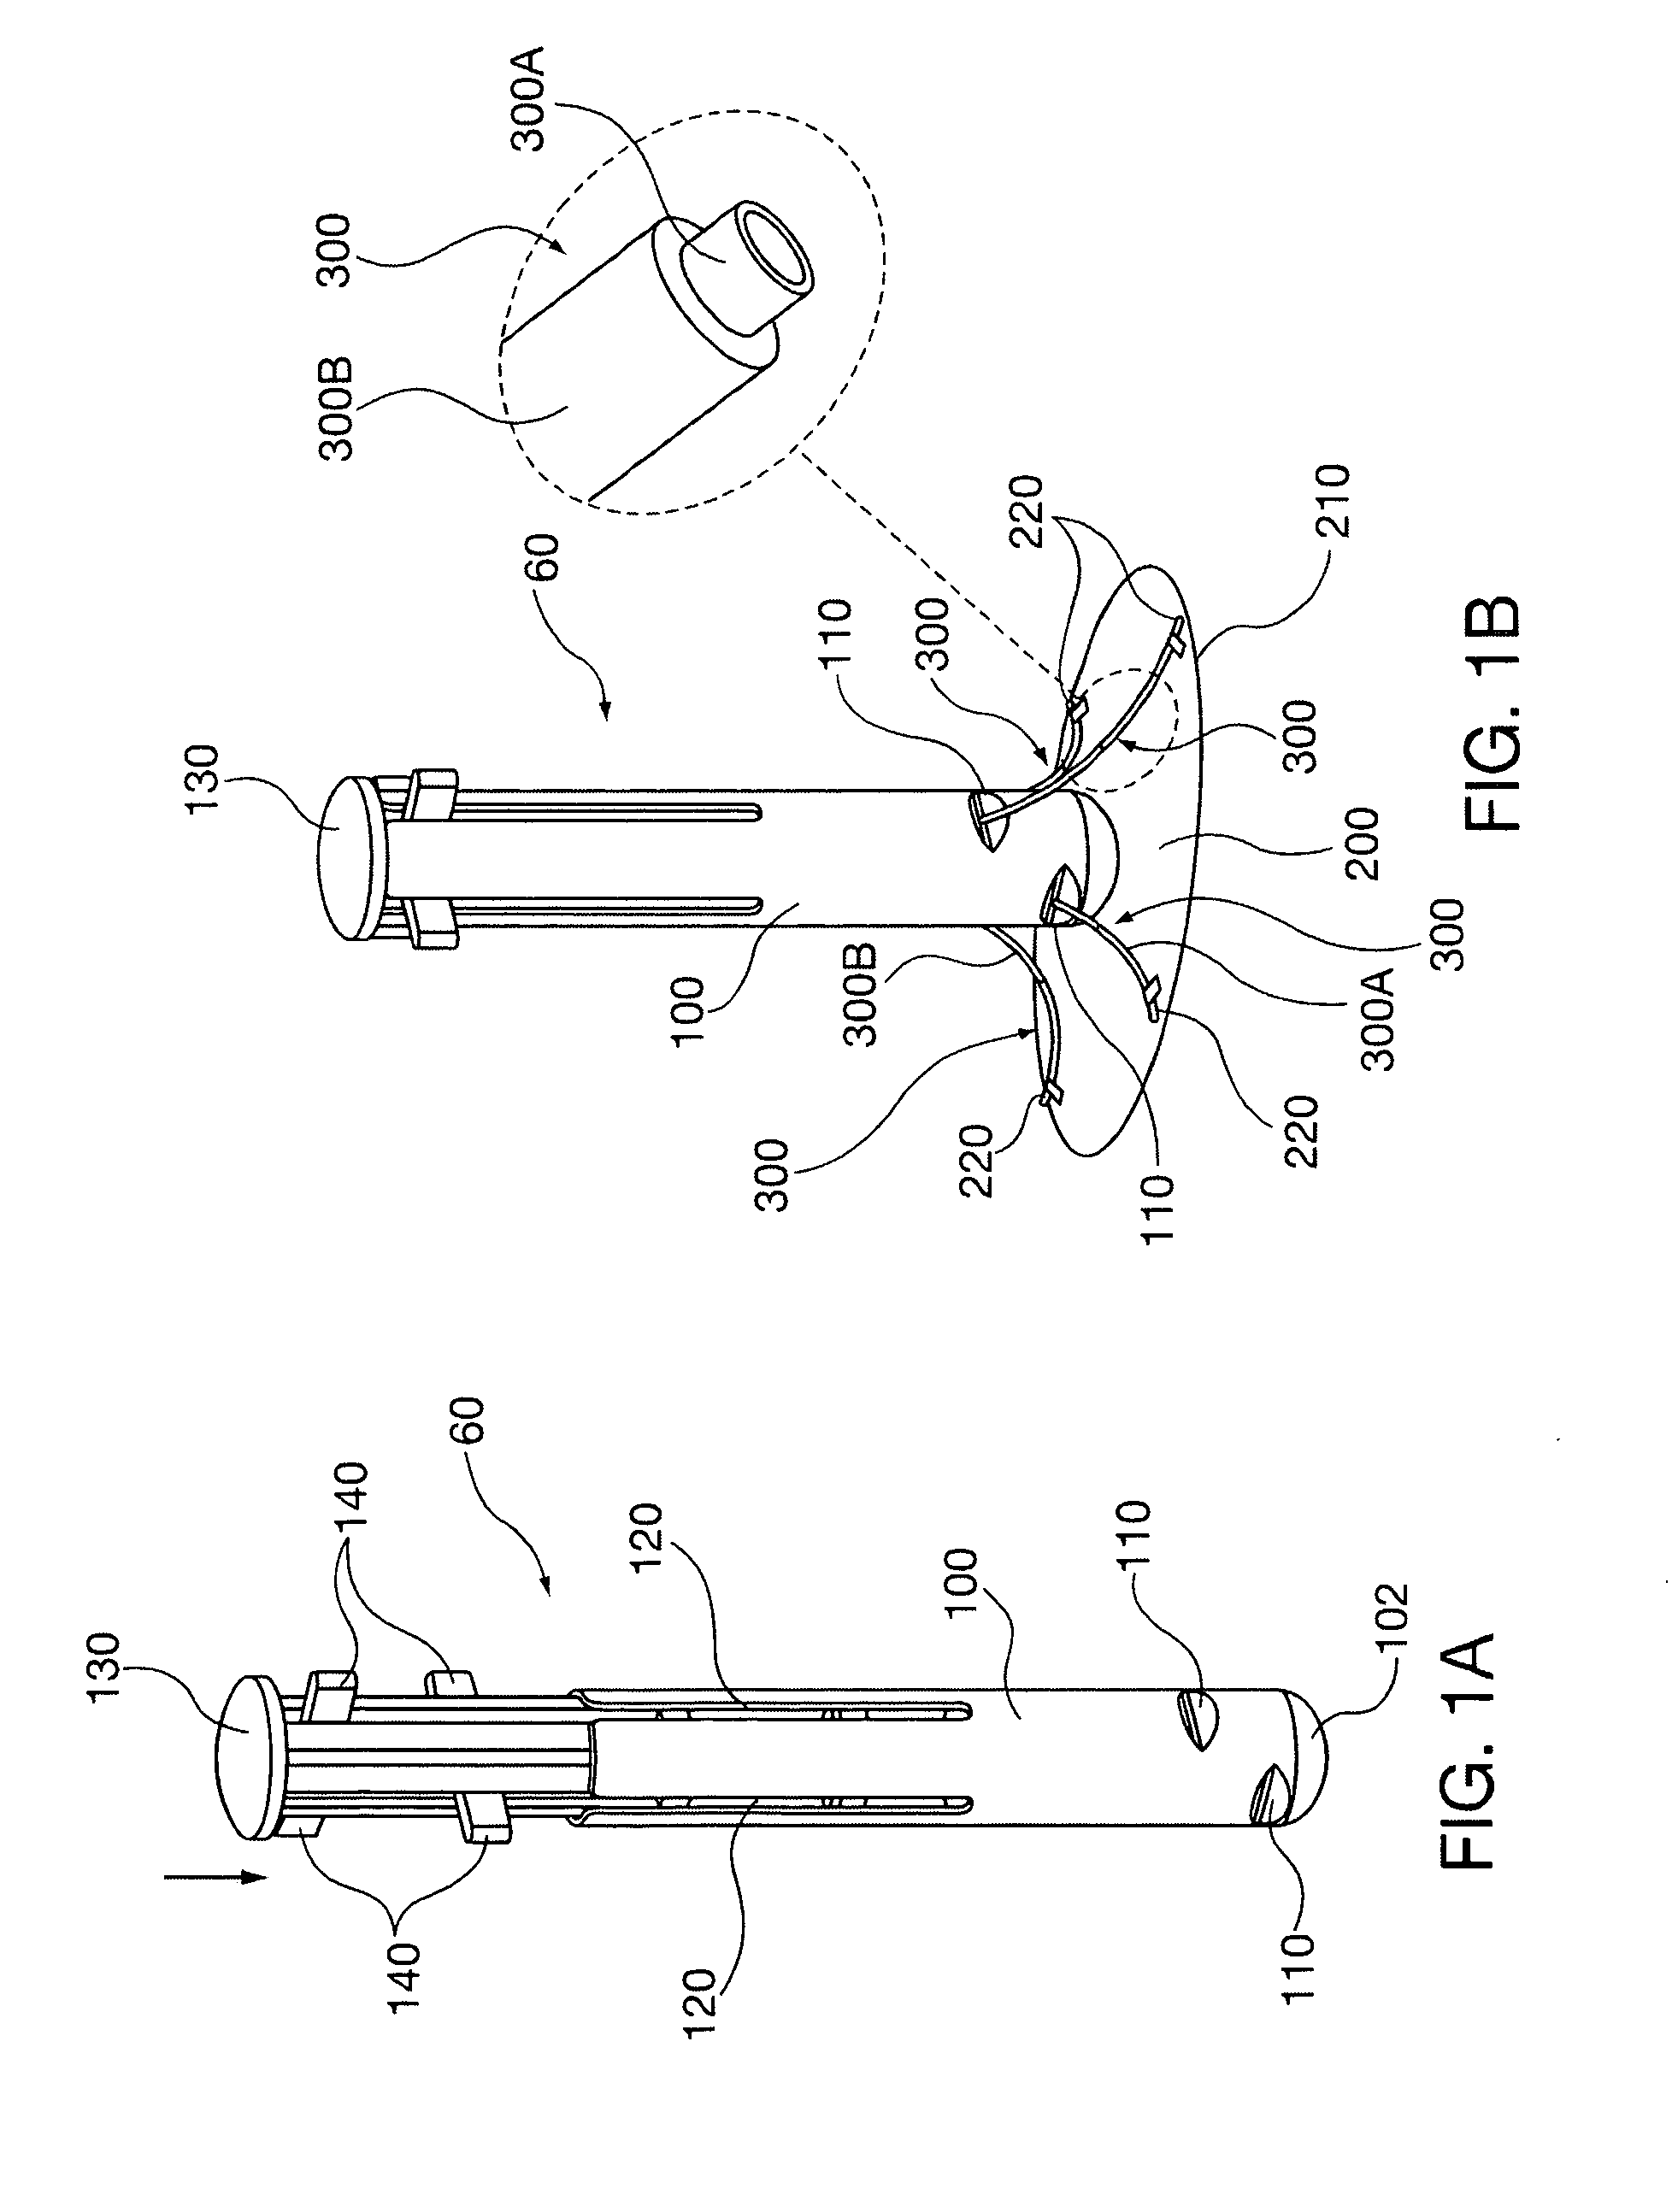 Method and apparatus for minimally invasive delivery, tensioned deployment and fixation of secondary material prosthetic devices in patient body tissue, including hernia repair within the patient's herniation site